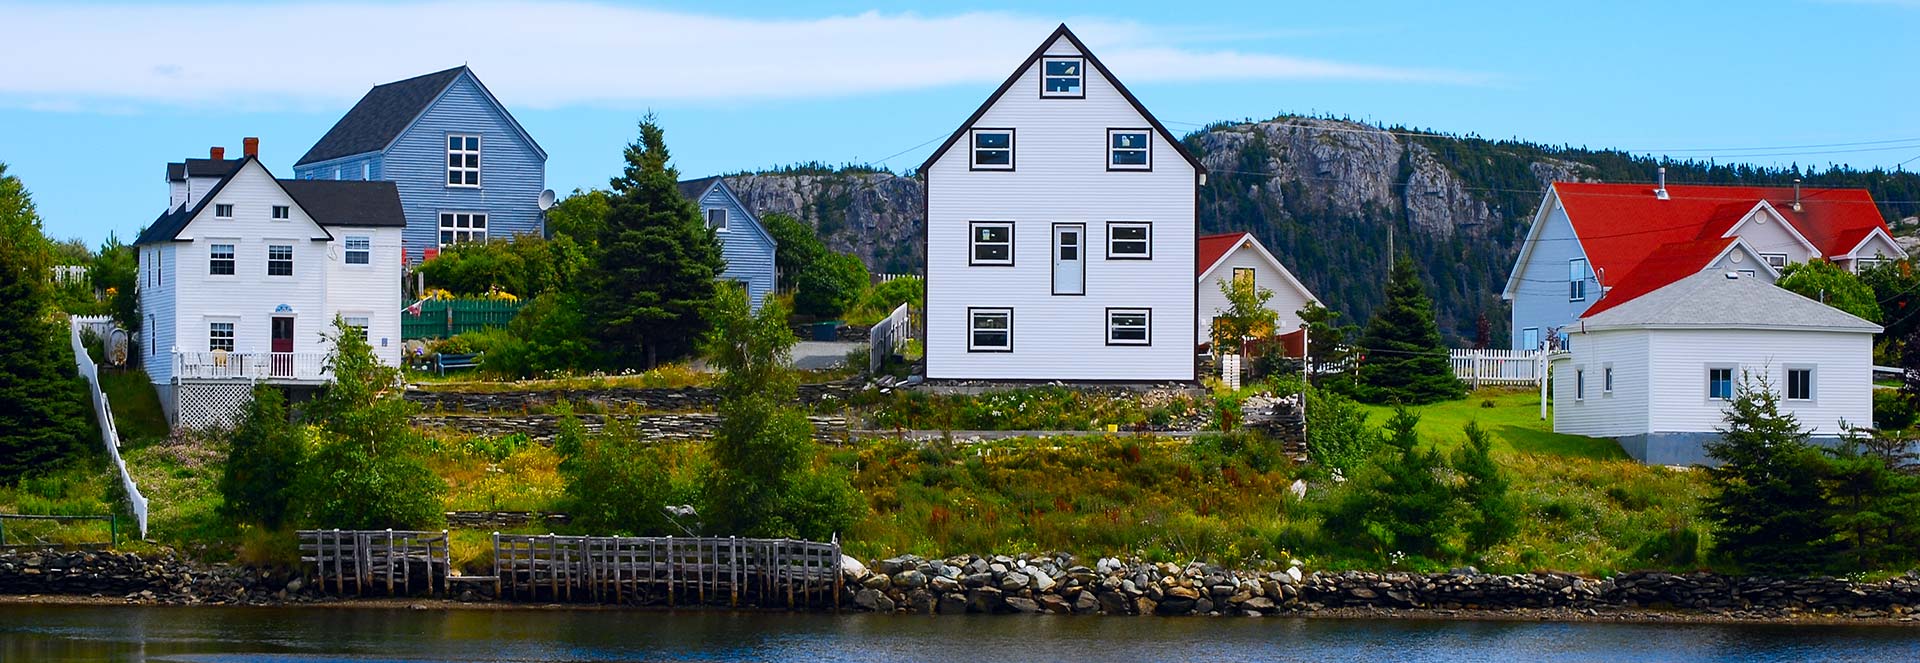 615-621 Old Broad Cove Road, PORTUGAL COVE – ST. PHILIPS